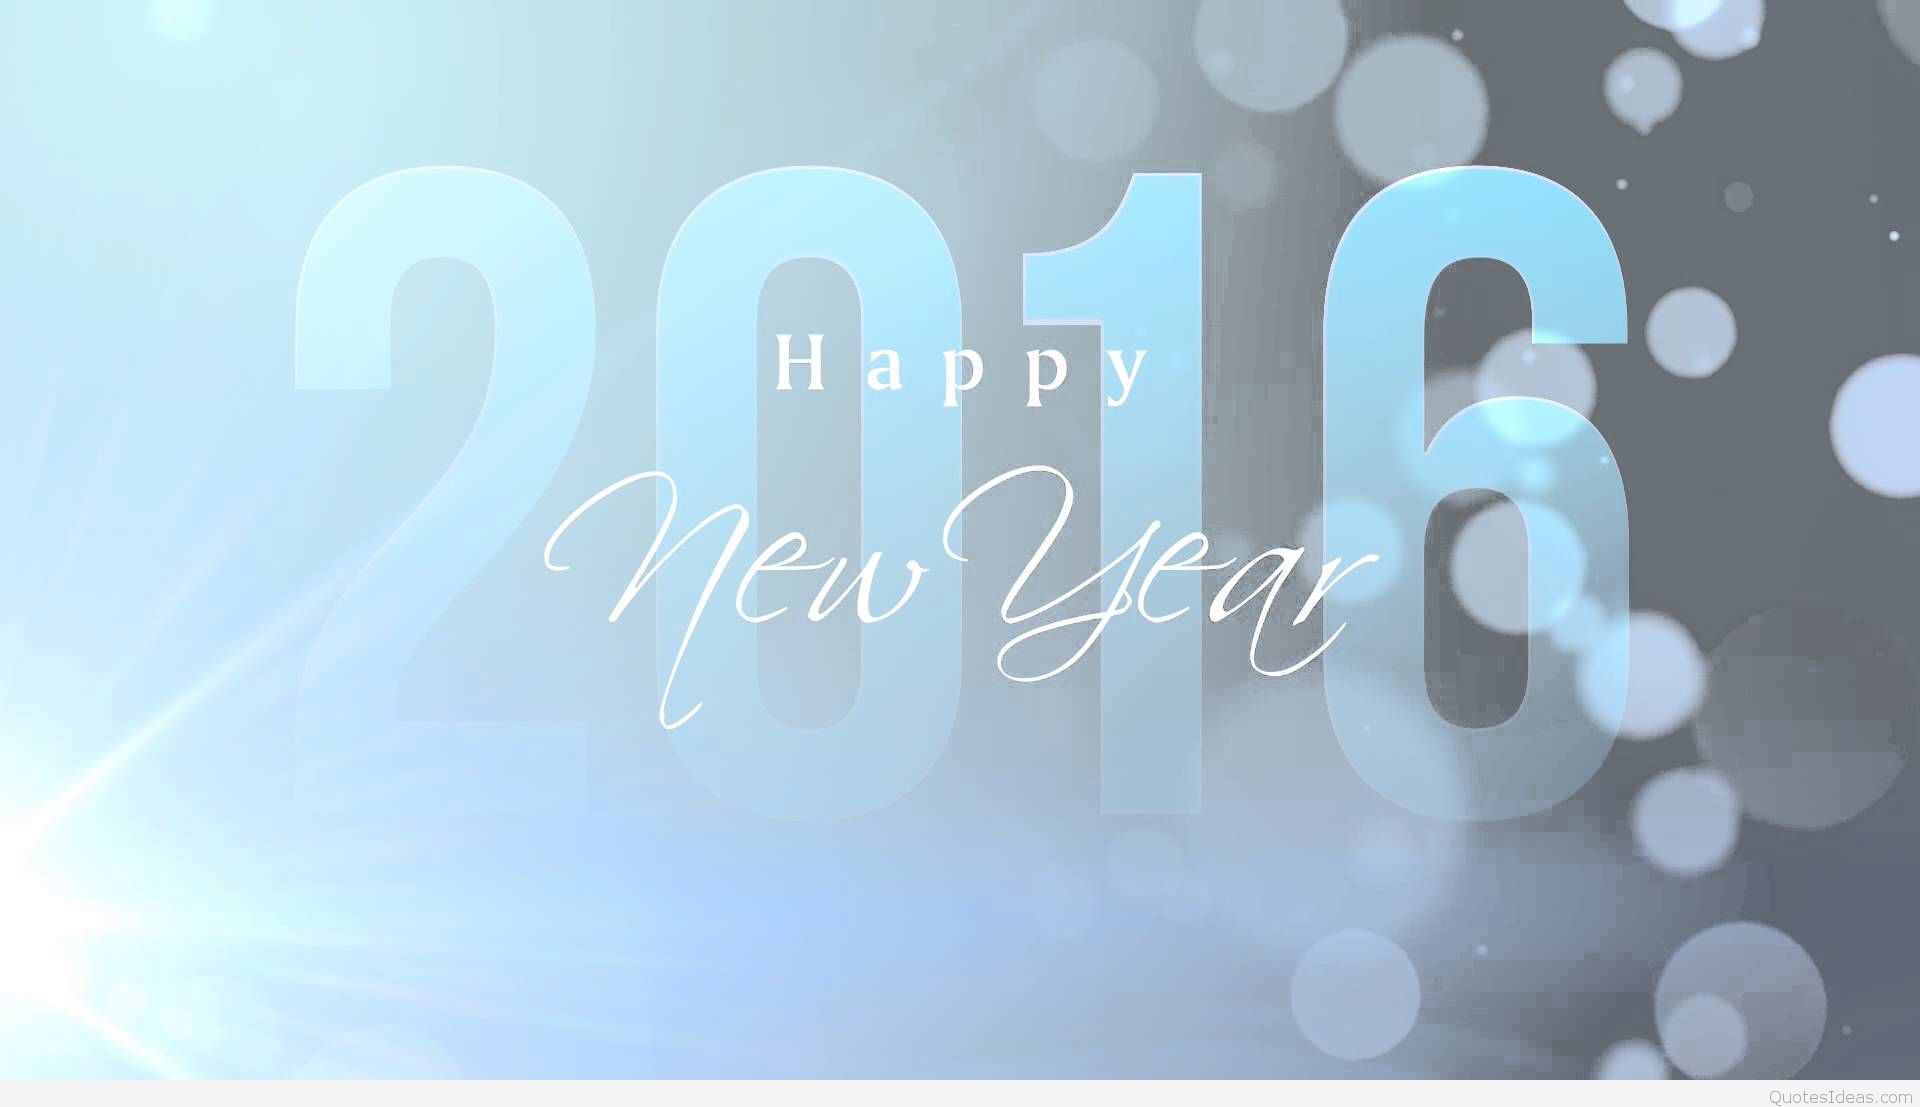 Happy new year photos wallpapers sayings 2016